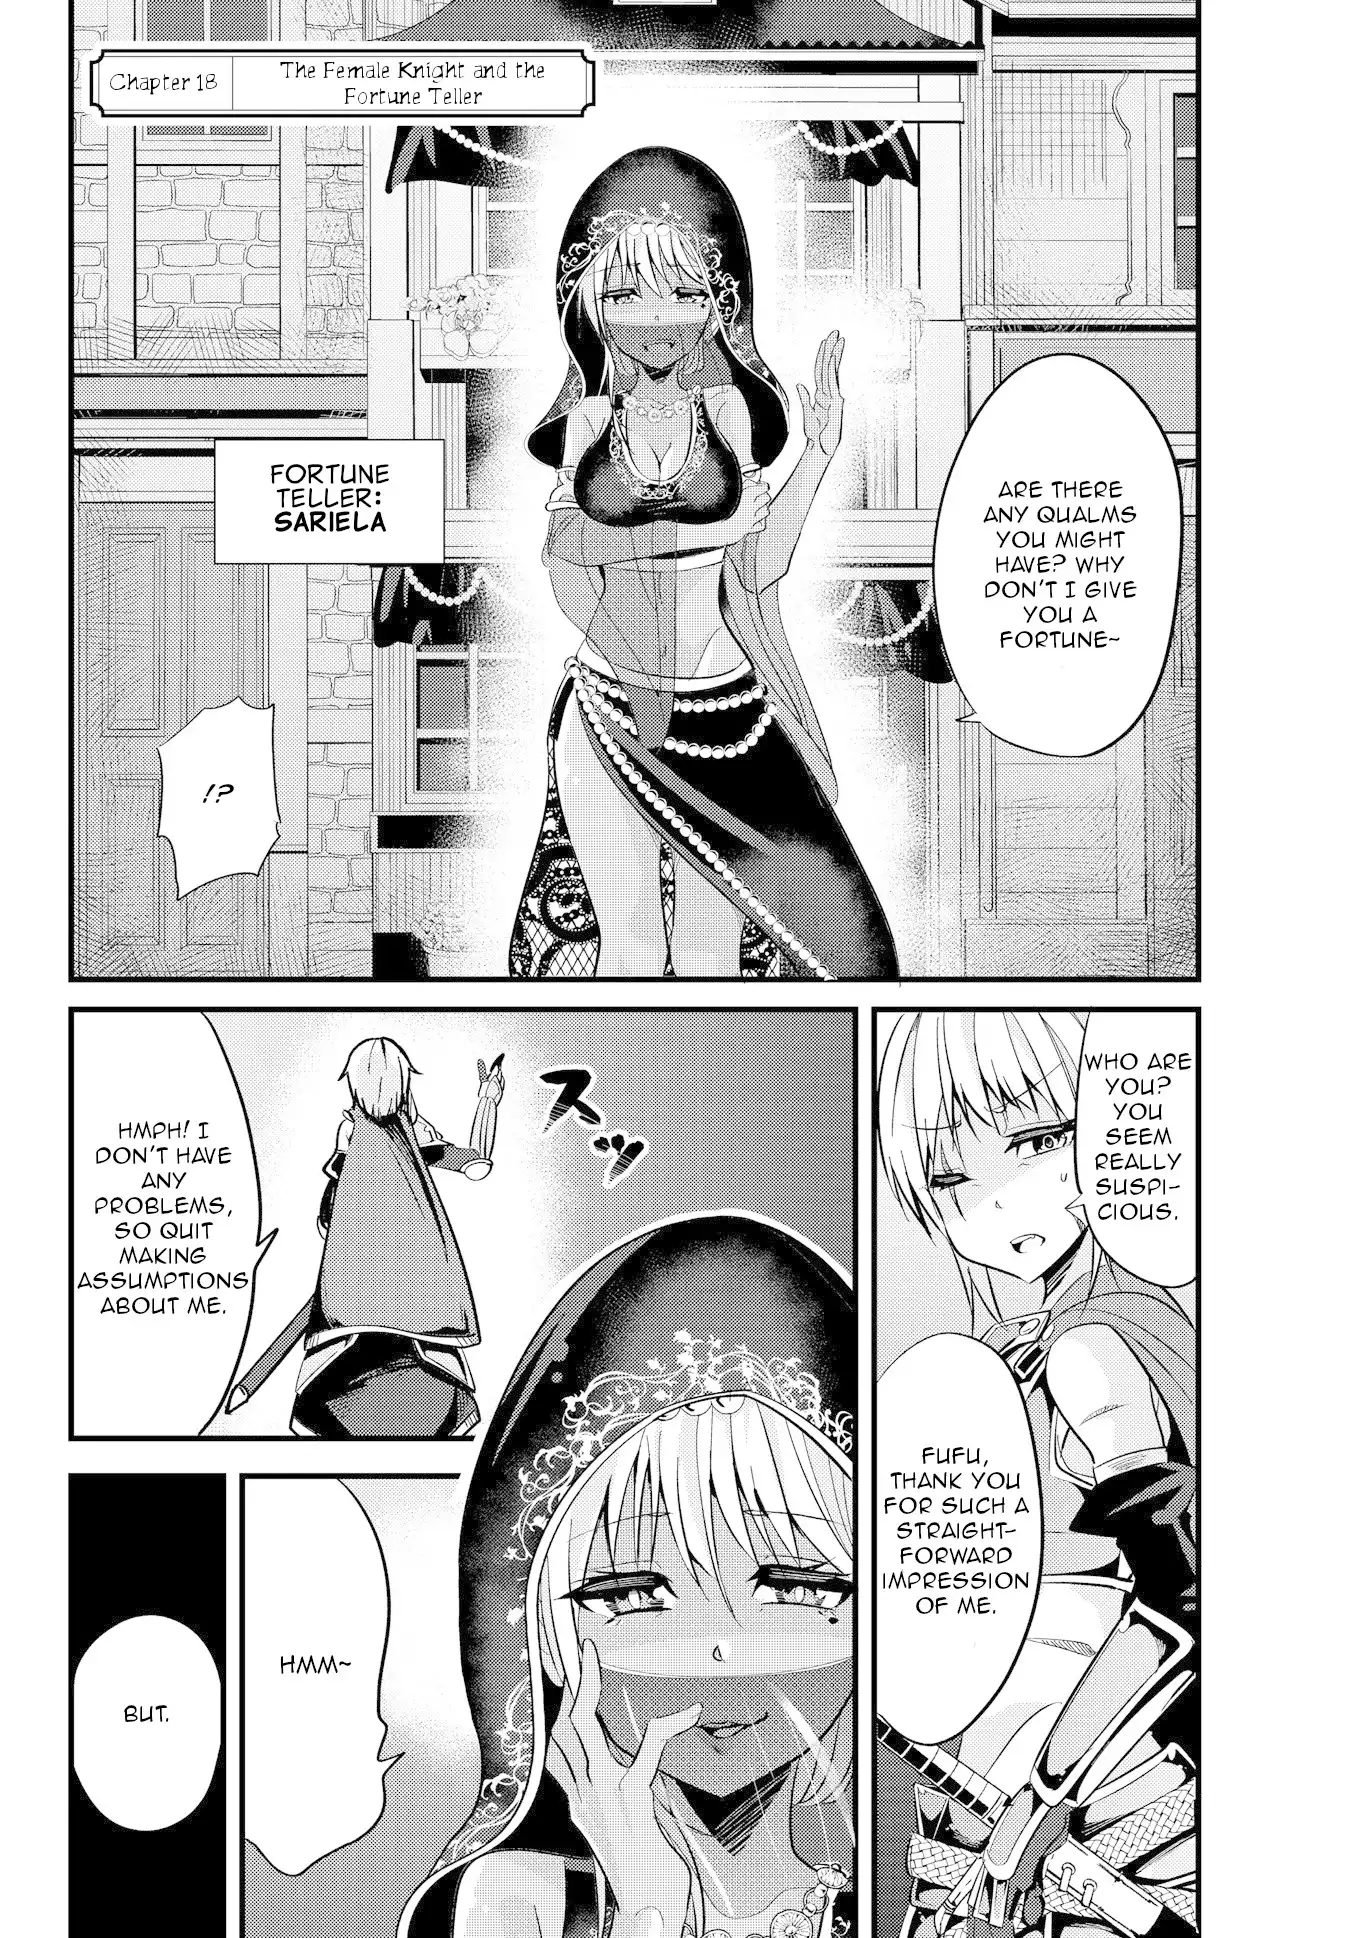 A Story About Treating a Female Knight, Who Has Never Been Treated as a Woman, as a Woman - Chapter 18 Page 2